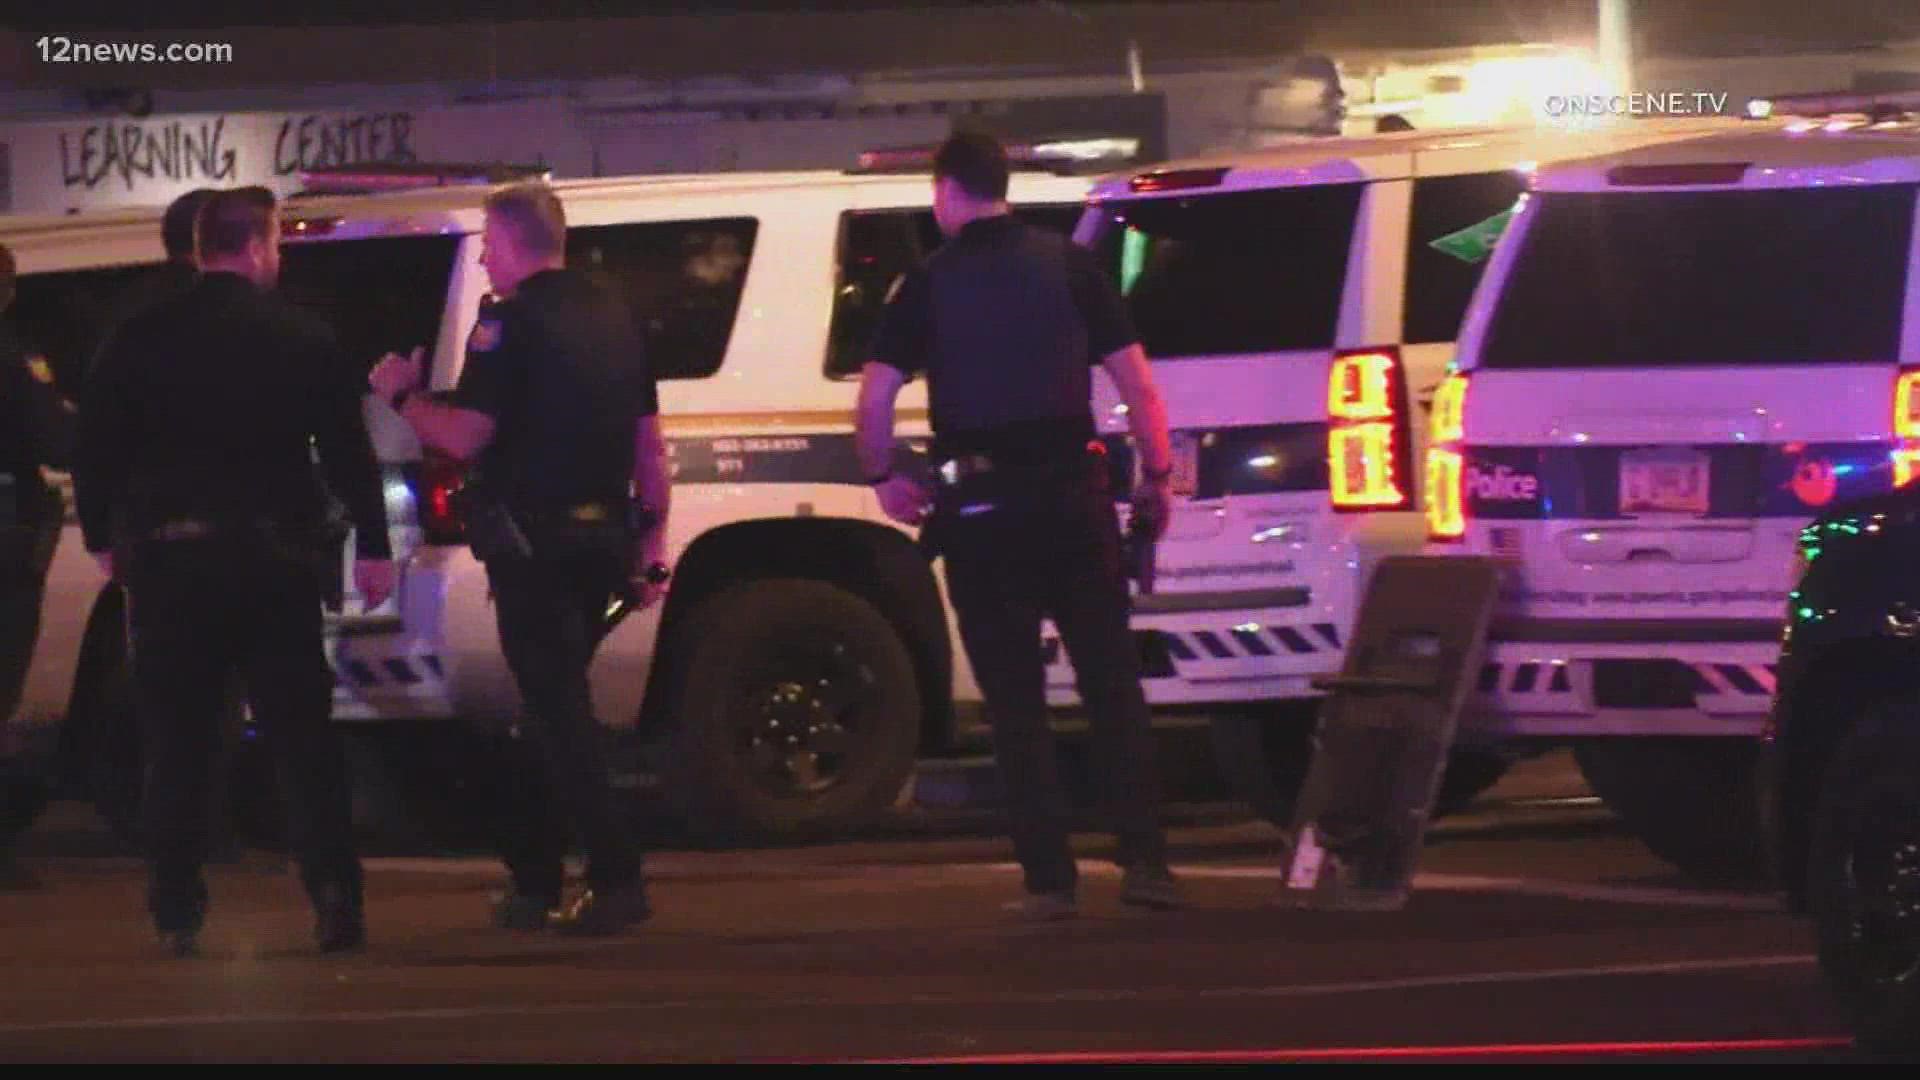 A Phoenix police officer who was shot during an "ambush" style shooting in west Phoenix early Sunday morning is expected to survive his injuries, officials said.